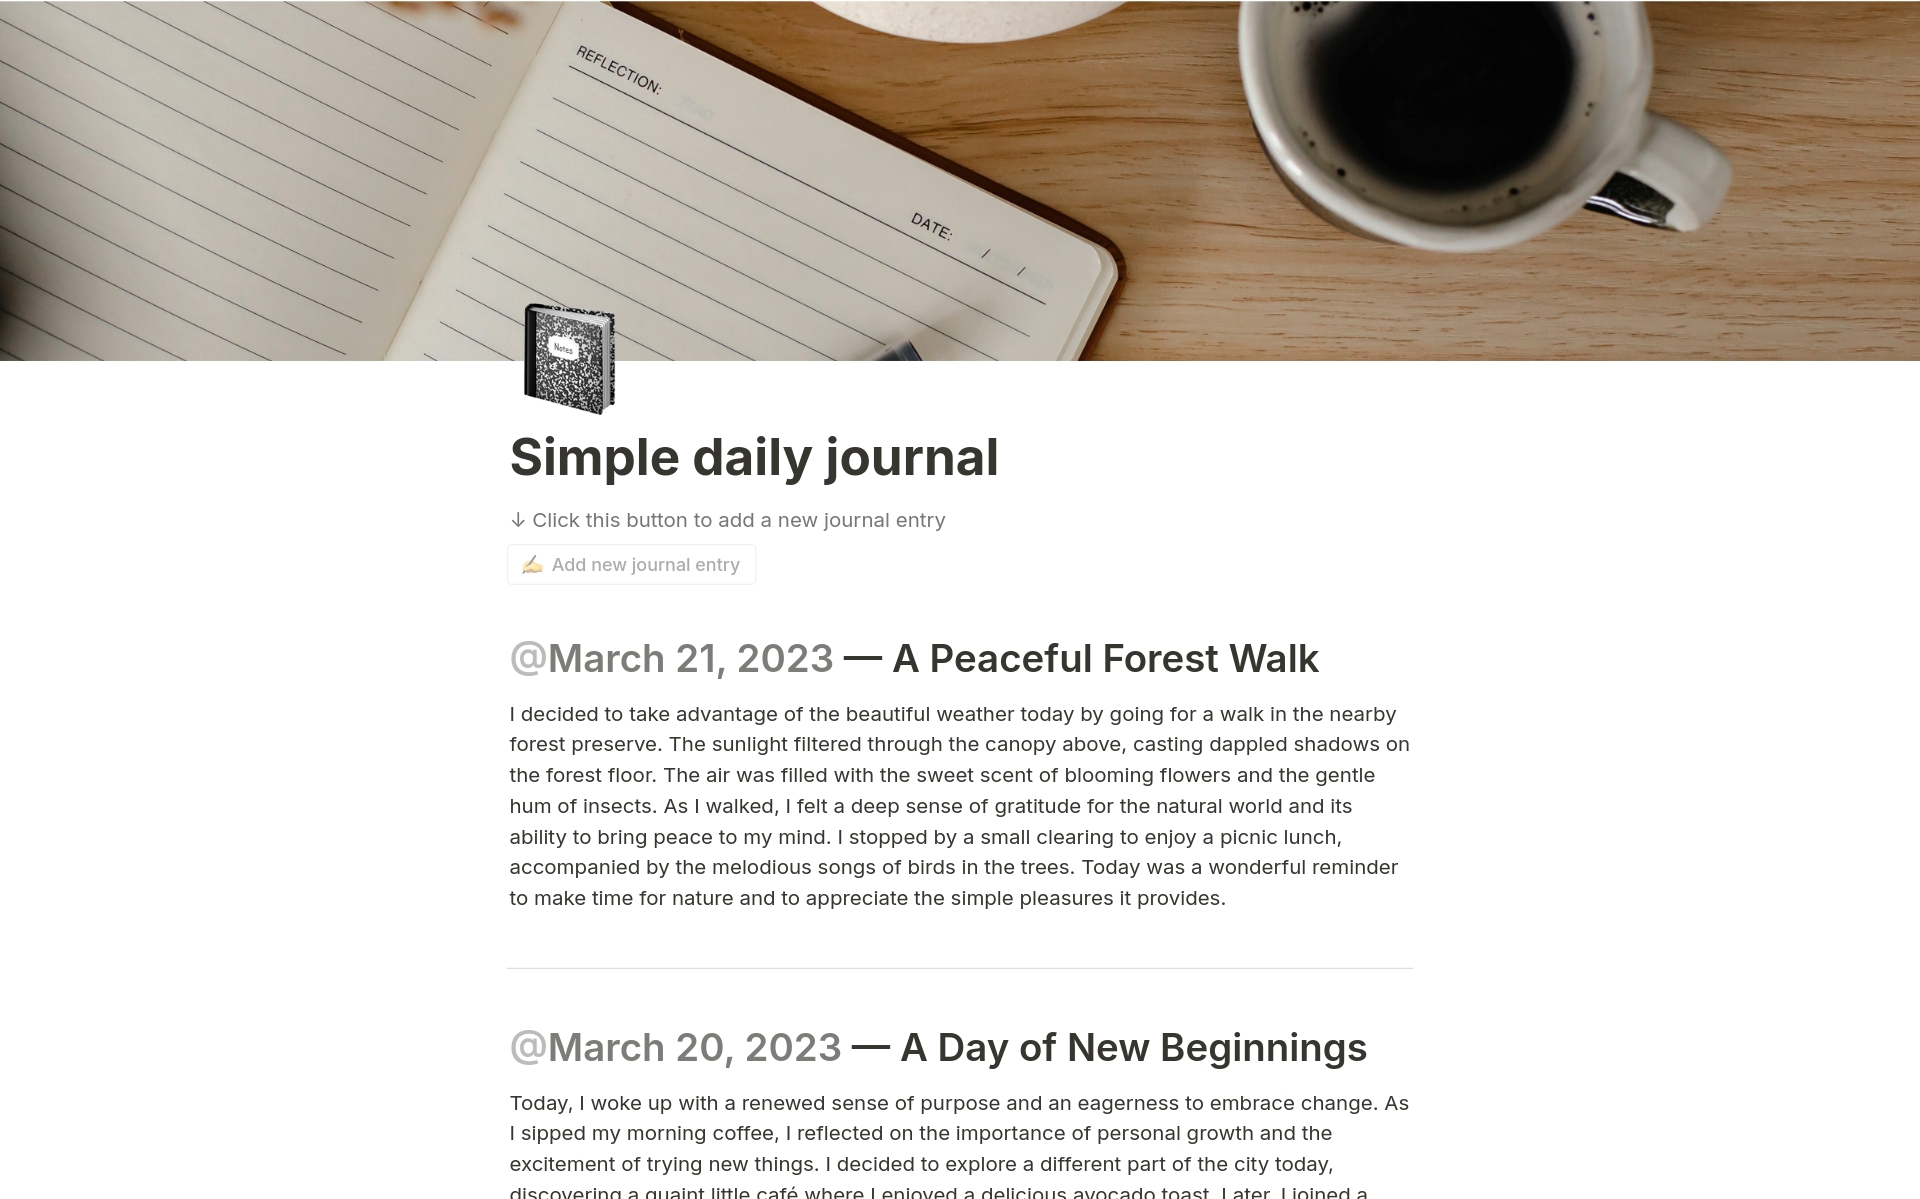 Document your life - daily happenings, special occasions, and reflections on your goals.